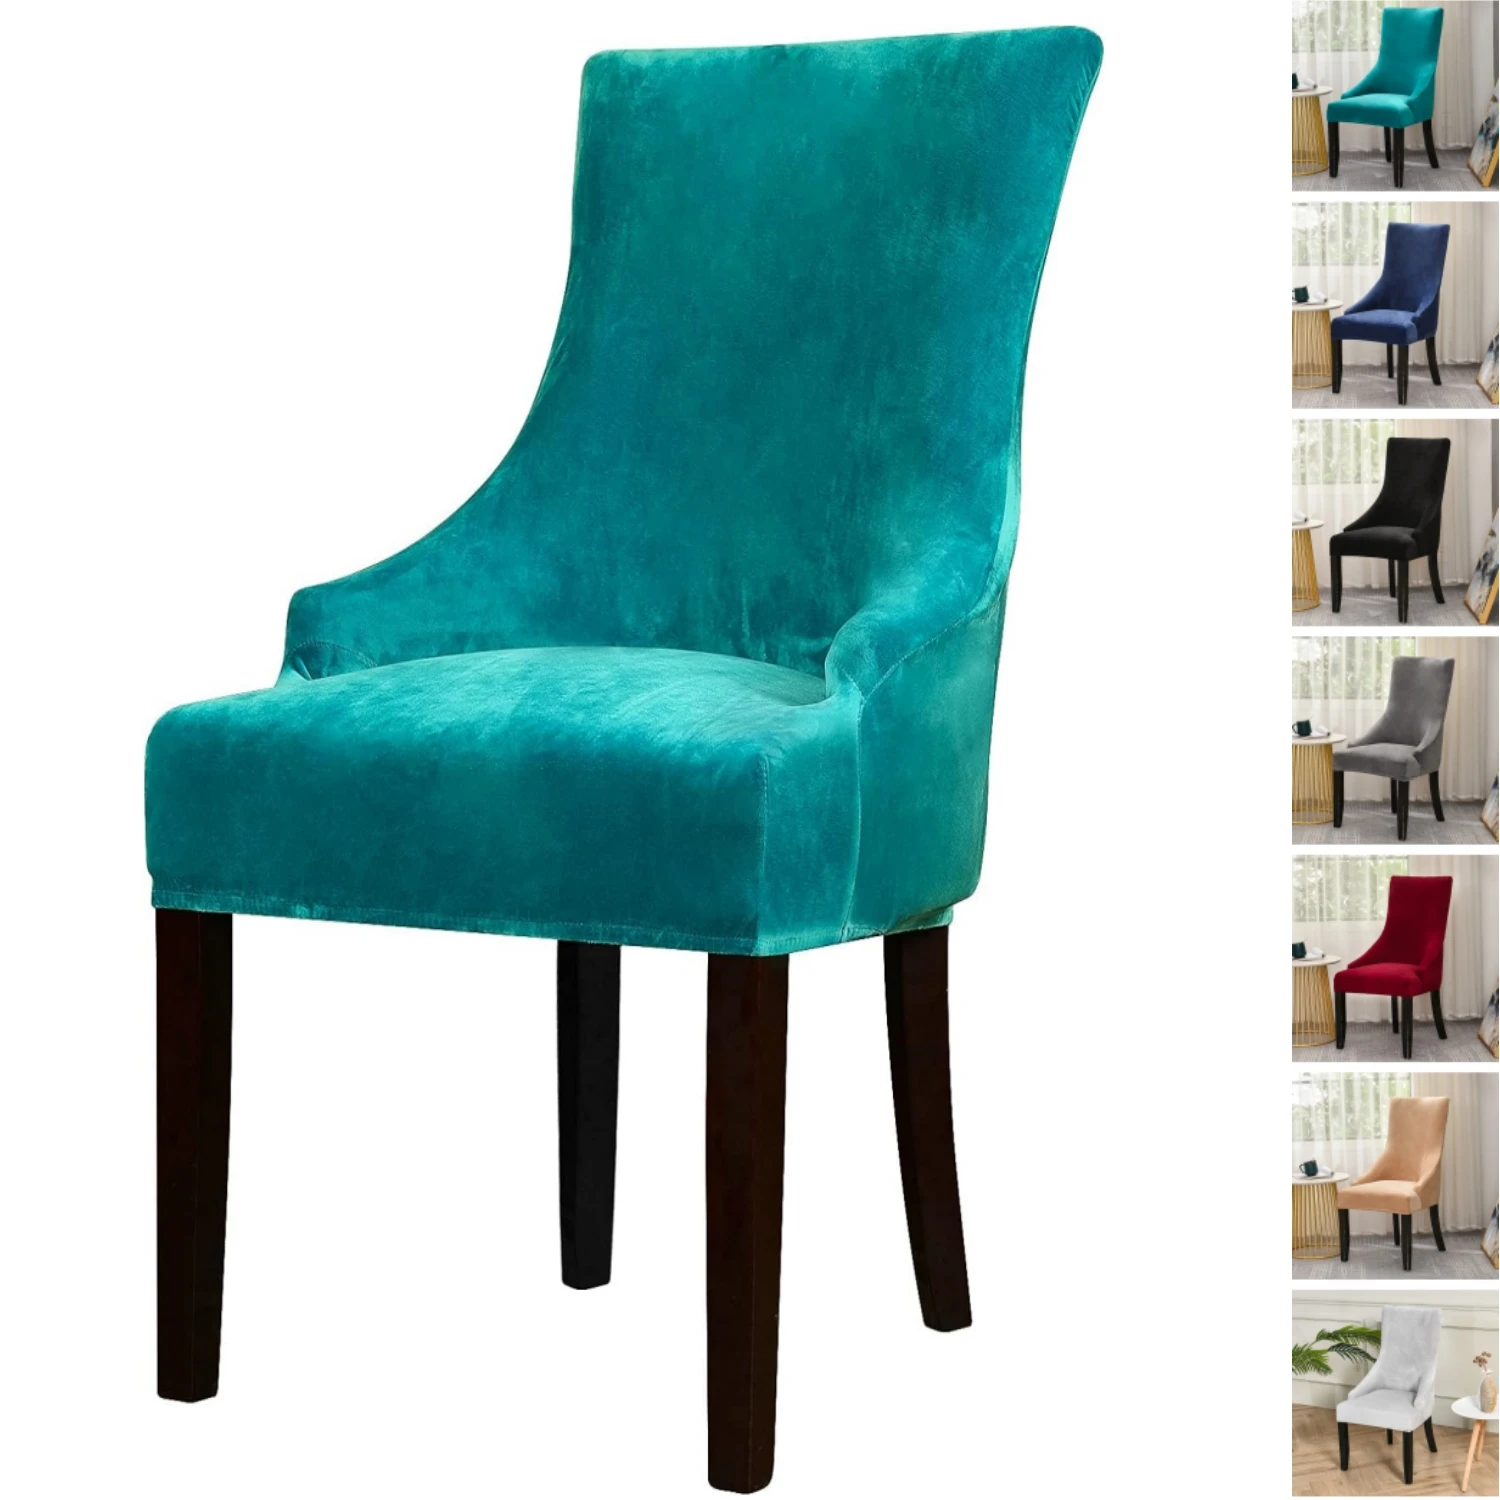 

Velvet Stretch Wingback Chair Cover Slipcover - Reusable Arm Chair Protector Cover Dining Room Banquet Home Decor etc Washable